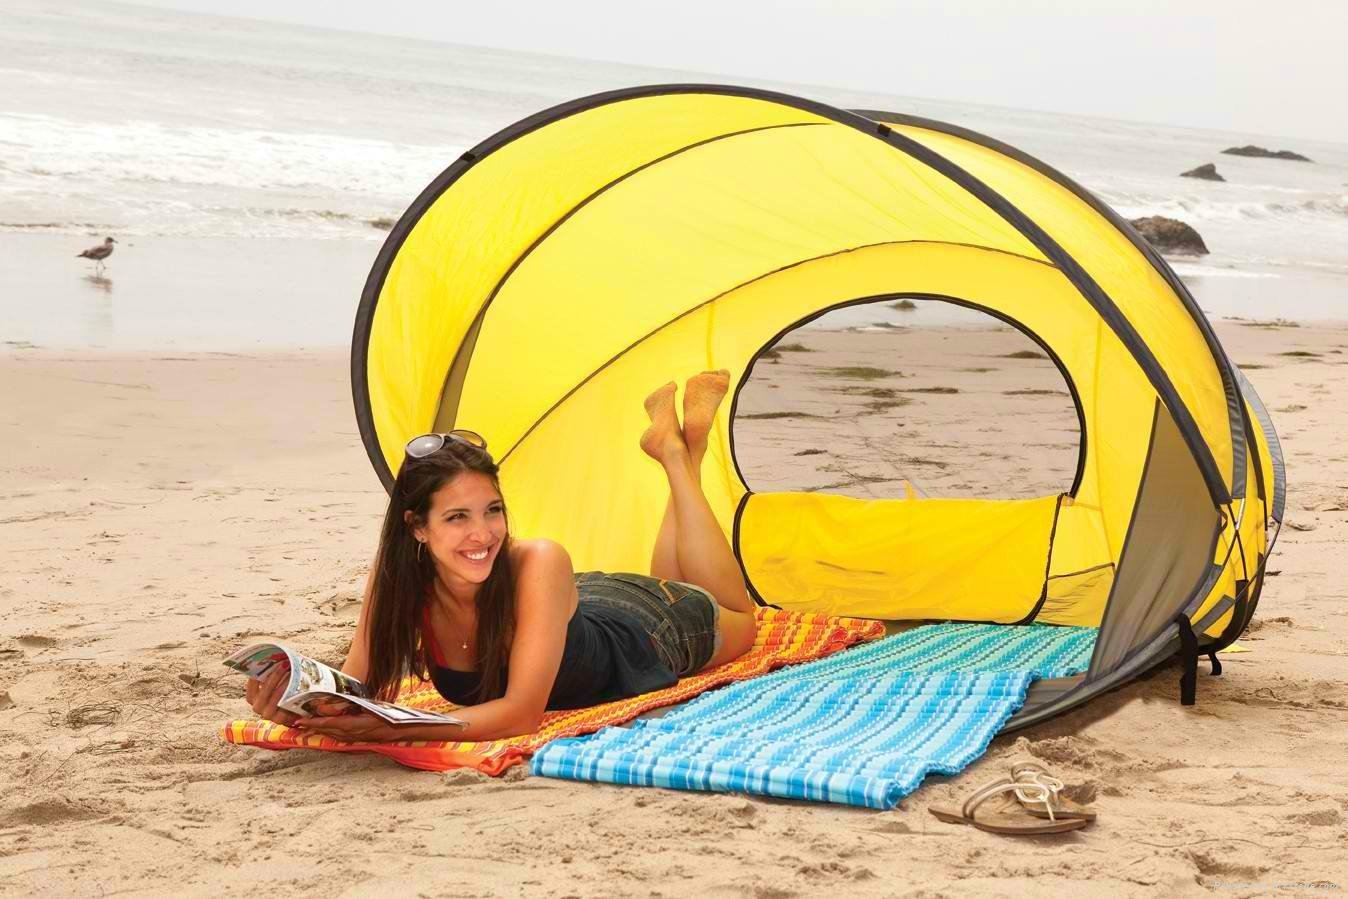 1-2 person single layer Pop Up Tent pop up beach tent - YL-TB01 - Yuelang  (China Manufacturer) - Travel,Outdoor & Camping - Sport Products